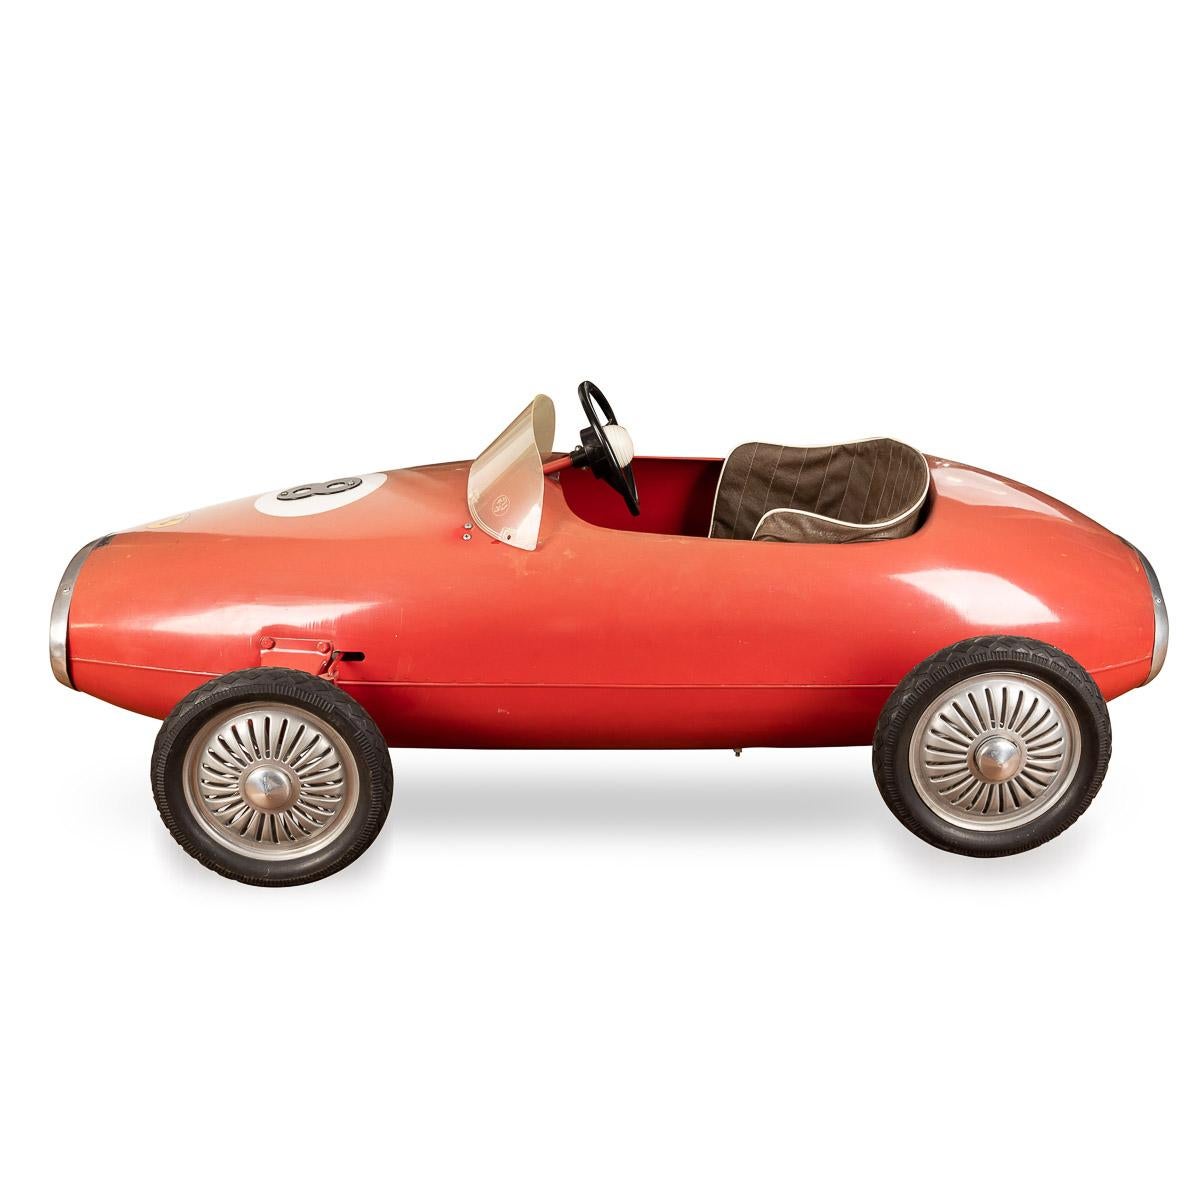 20th Century Belgian made “Ferrari“ model pedal car, of metal construction, red painted monocoque steel body, number 8, treadle pedals to cranked rear axle, steel panel seat with brown vinyl cover, plastic steering wheel, perspex windscreen, alloy